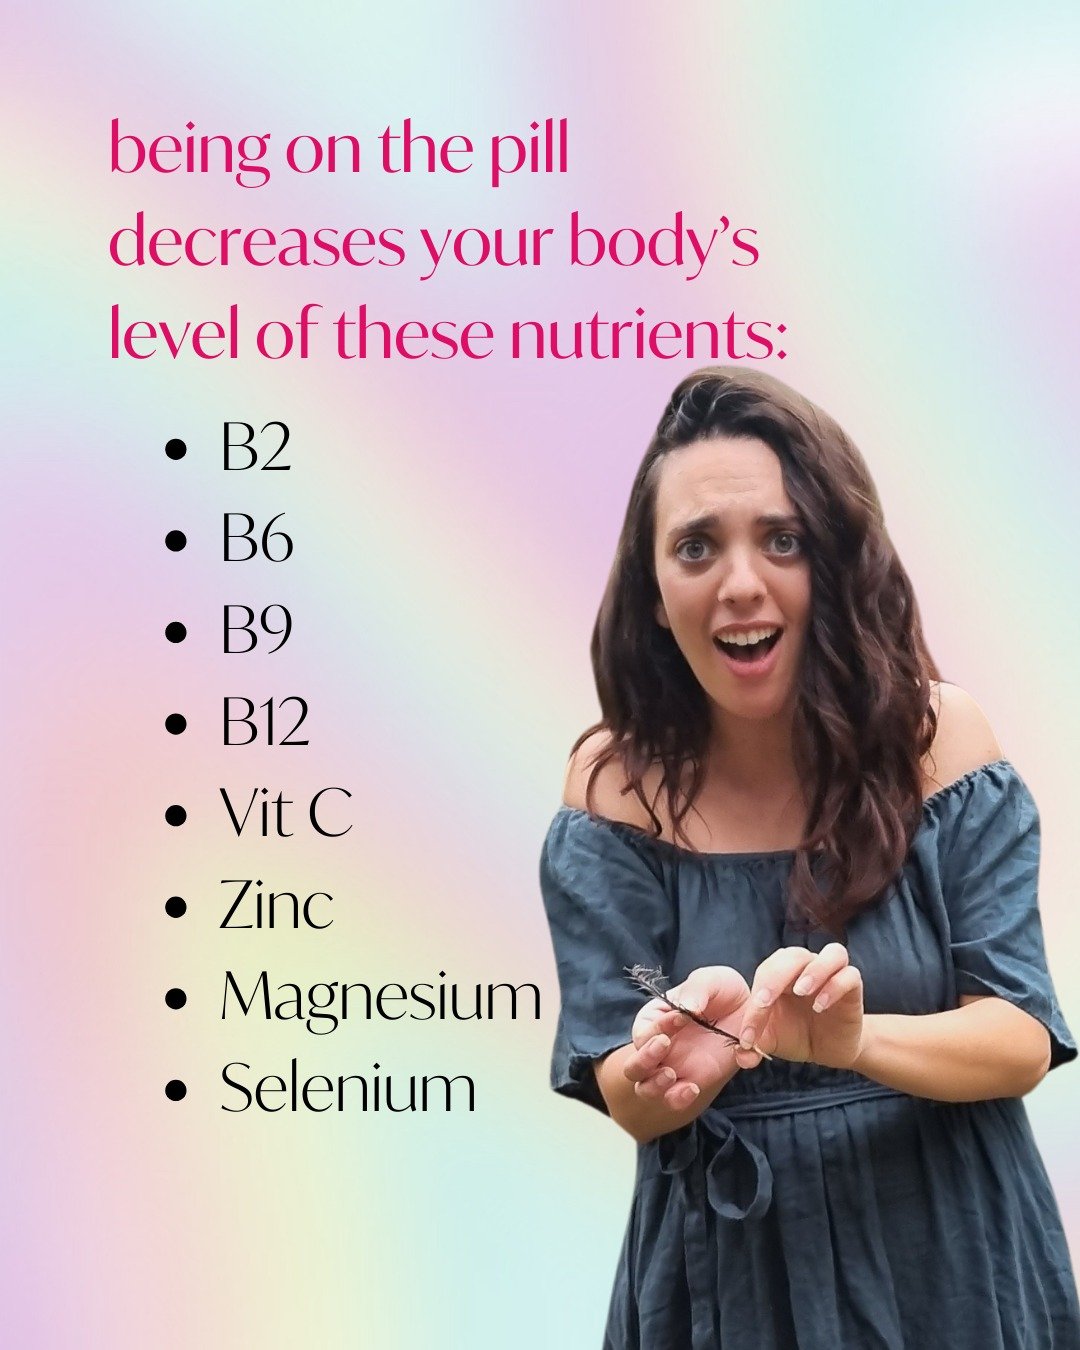 📣 let's make this more well-known info among women &amp; peeps on the pill! 📣 spread the word! 📣 nutrition matters! 📣

and: MANY medications impact your body's nutritional status, not just synthetic hormonal contraception!